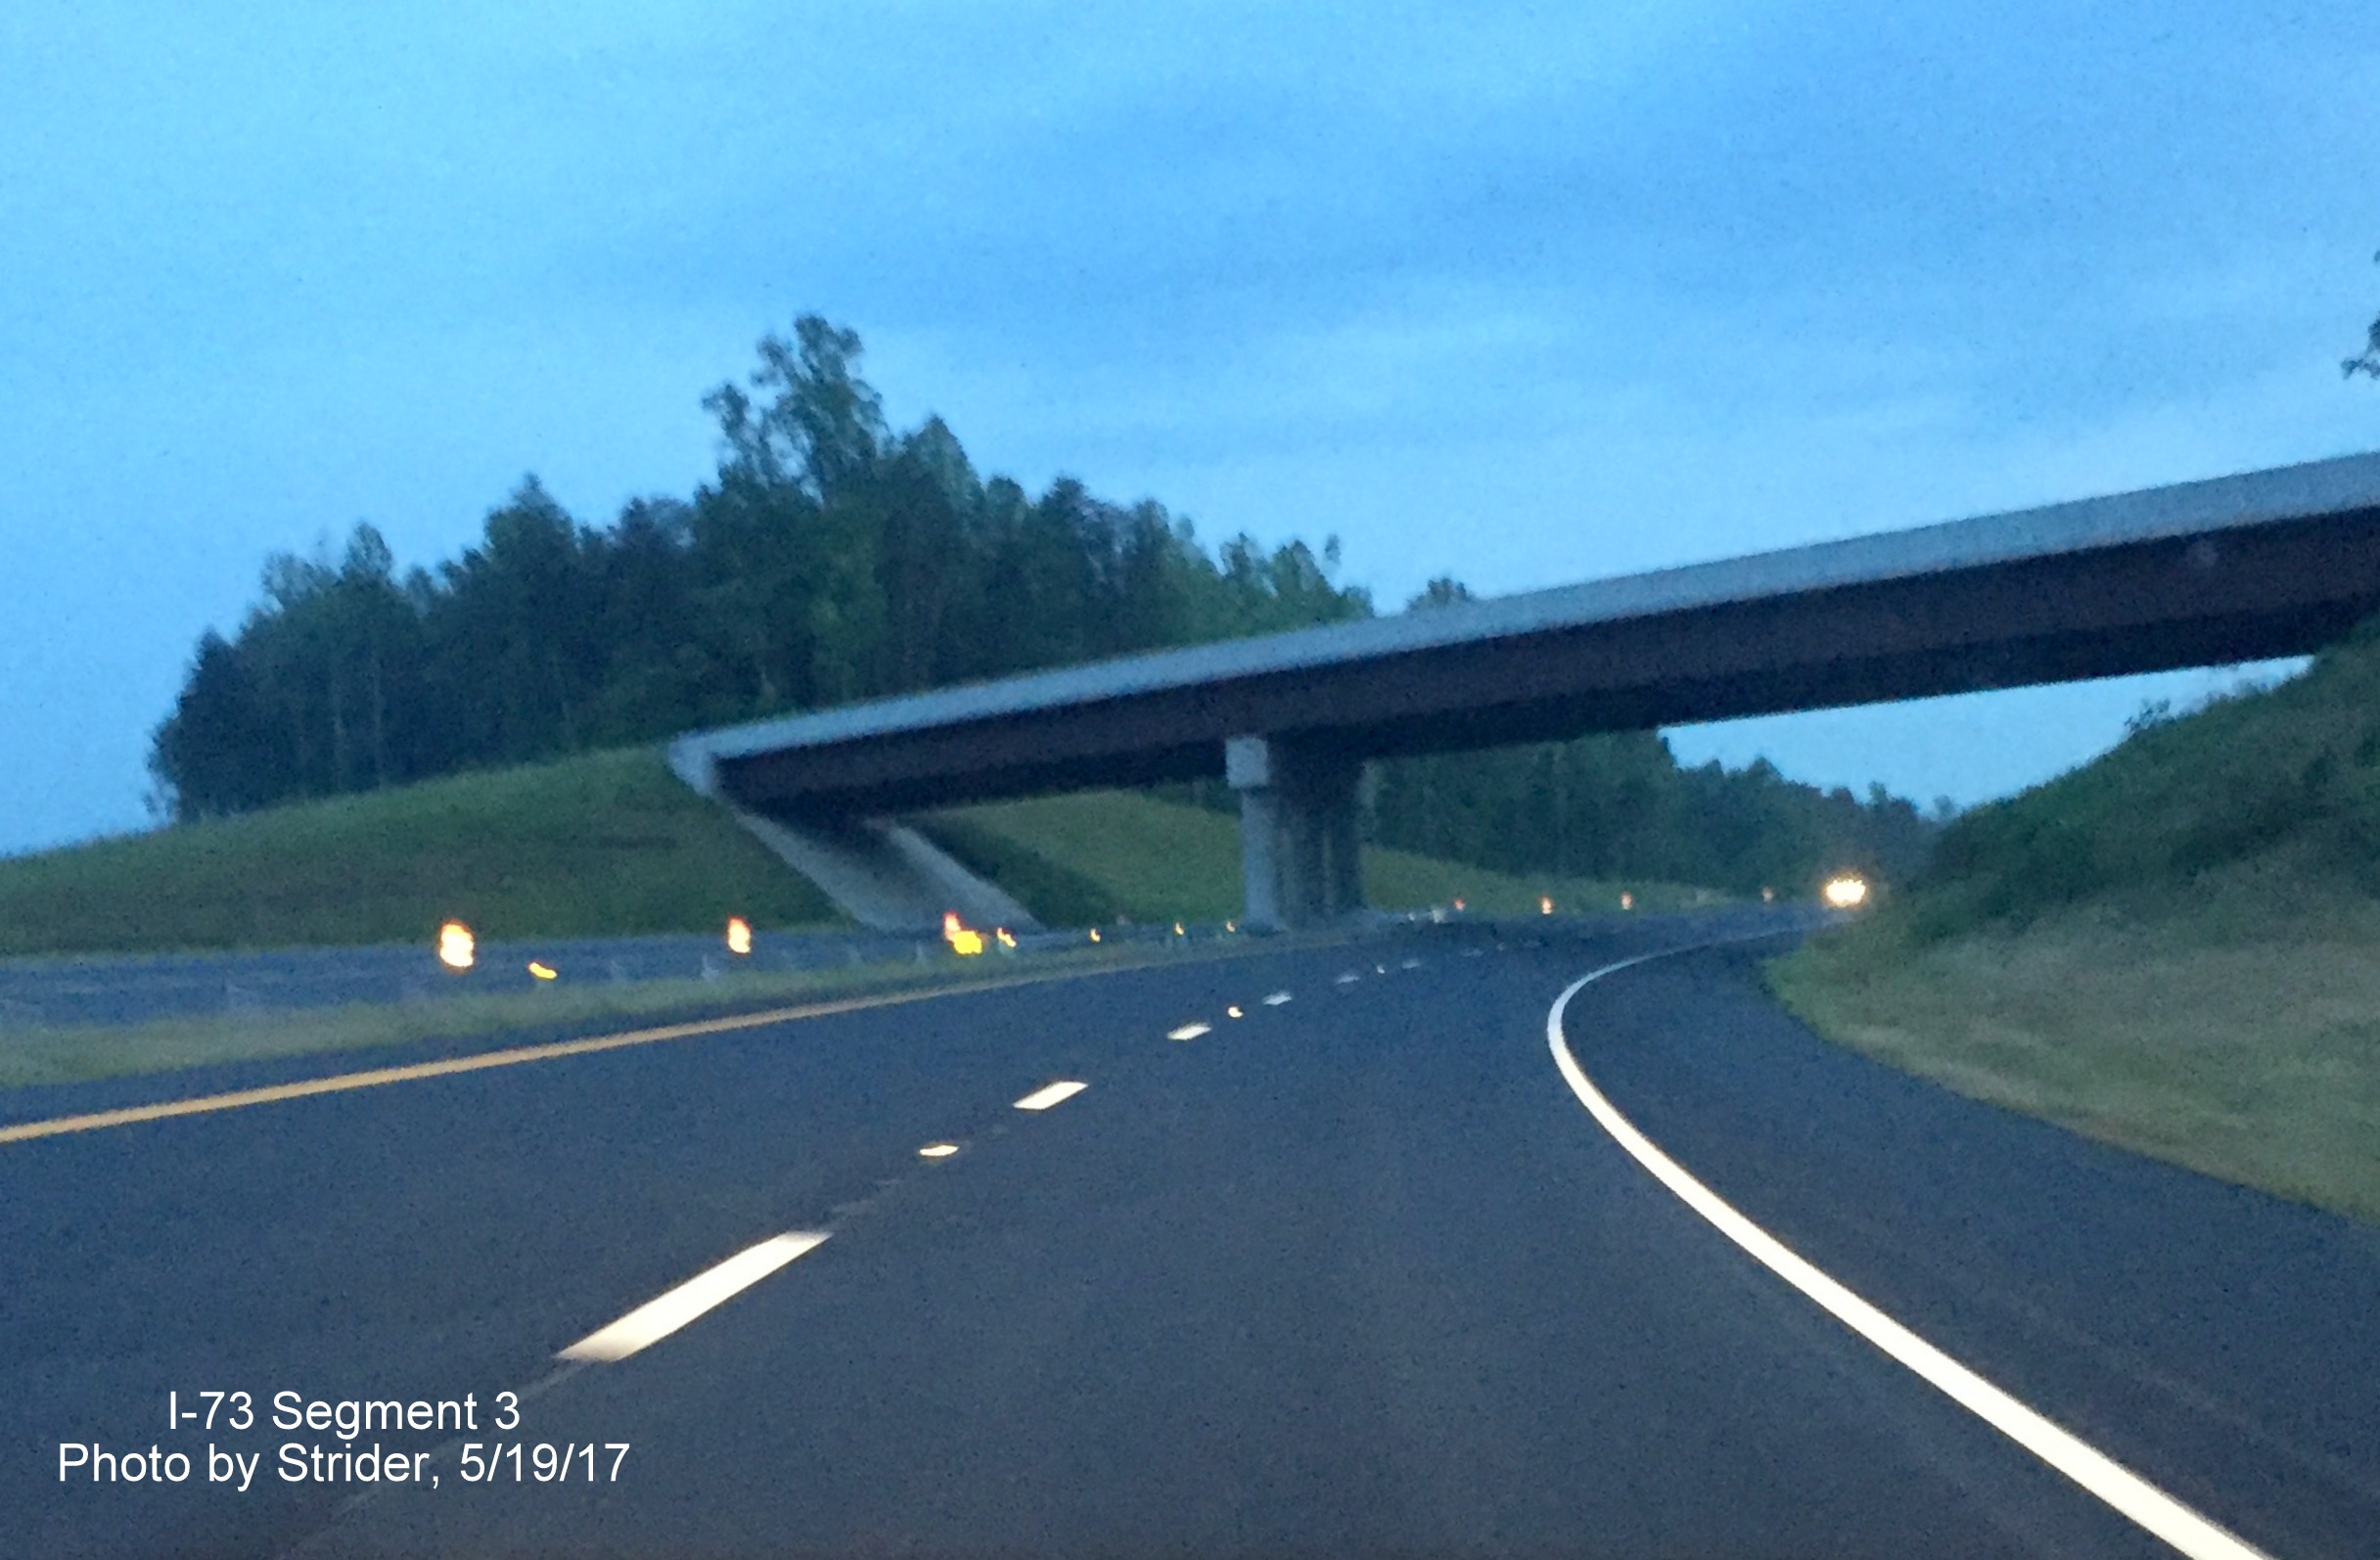 Image taken of US 220 South flyover bridge over newly opened I-73 Sorth highway in Summerfield, by Strider